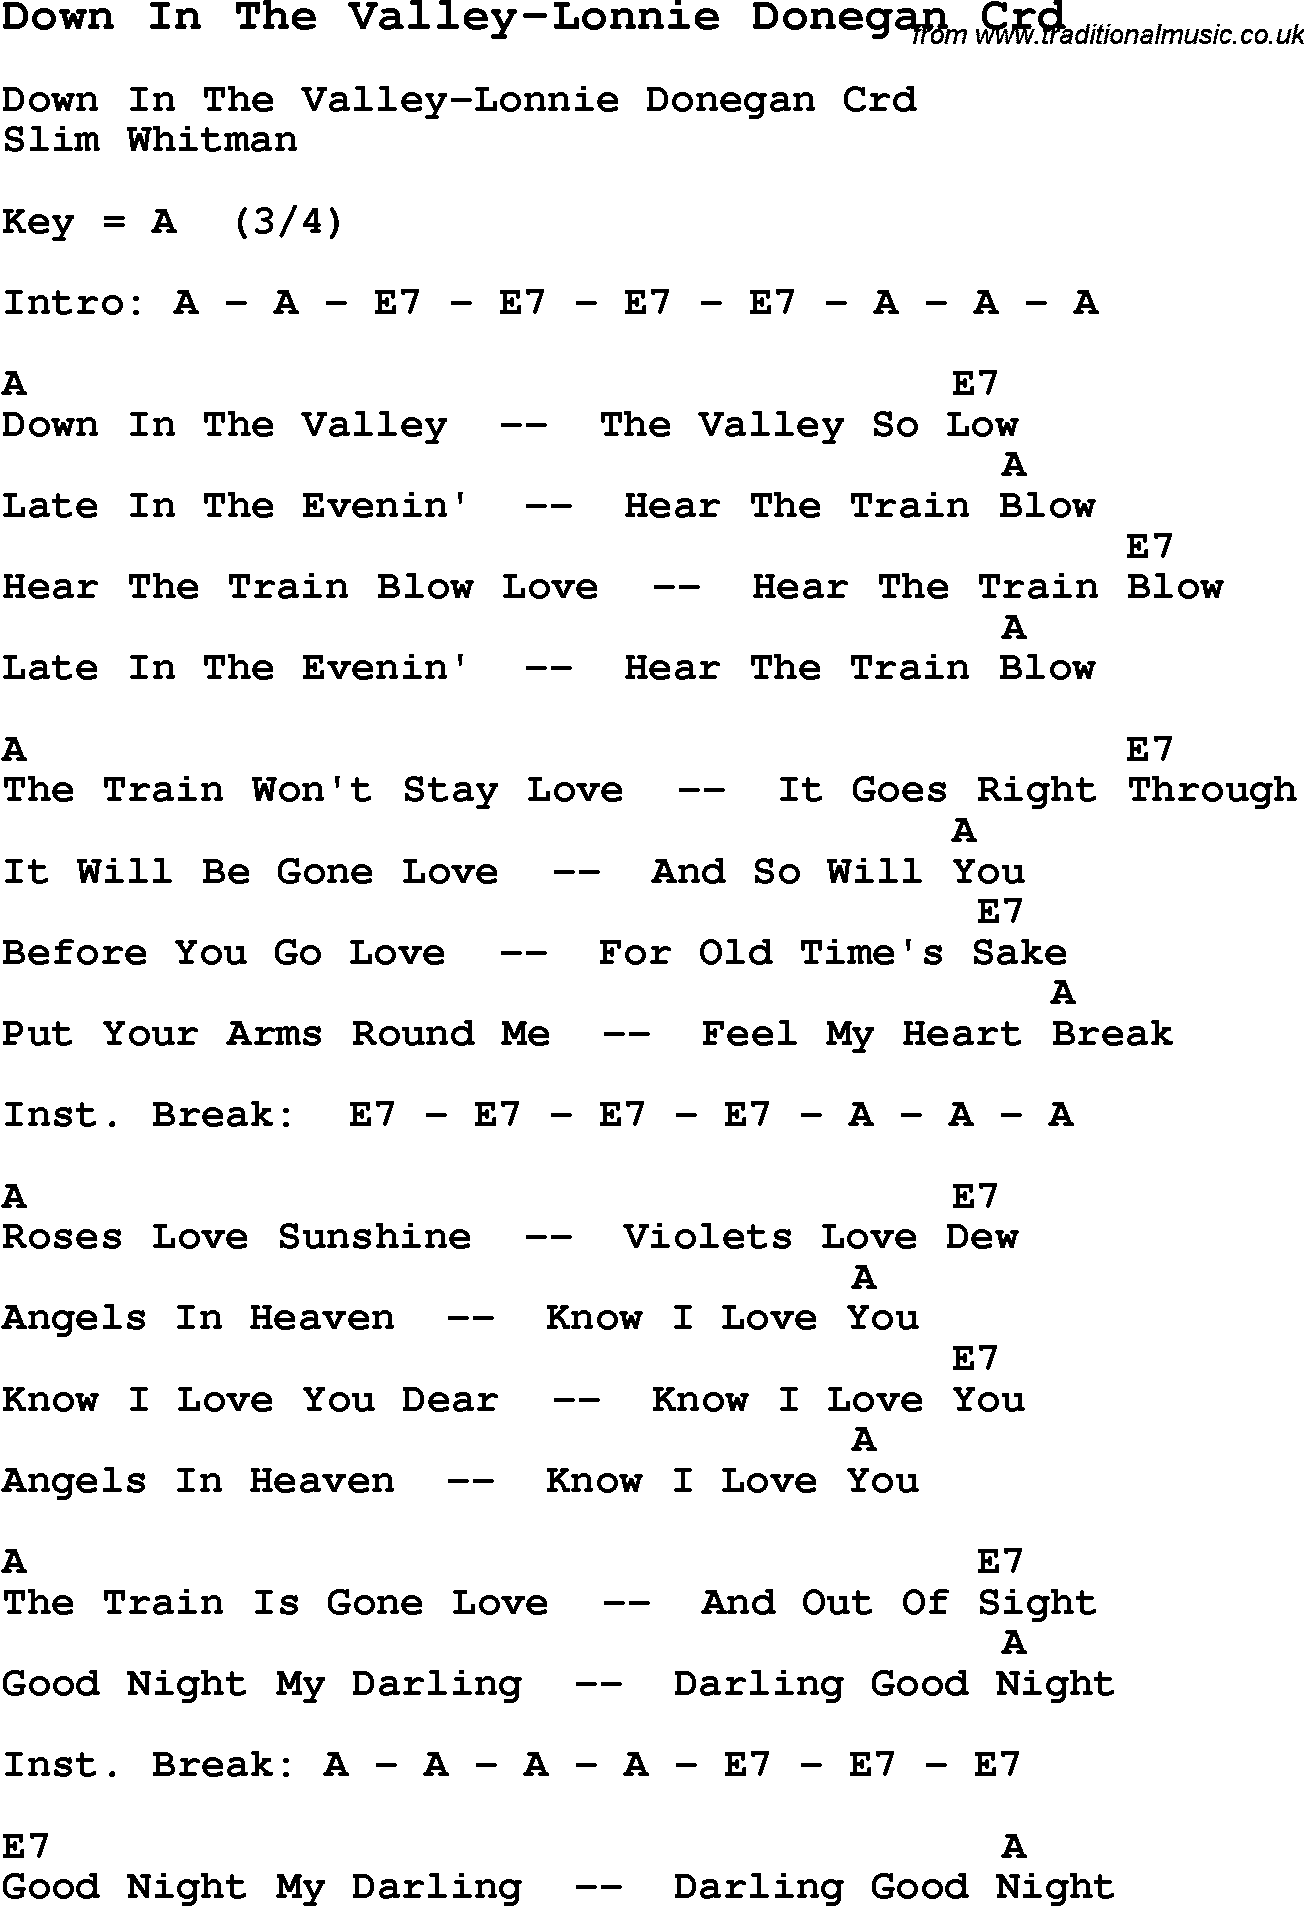 Skiffle Song Lyrics for Down In The Valley-Lonnie Donegan with chords for Mandolin, Ukulele, Guitar, Banjo etc.